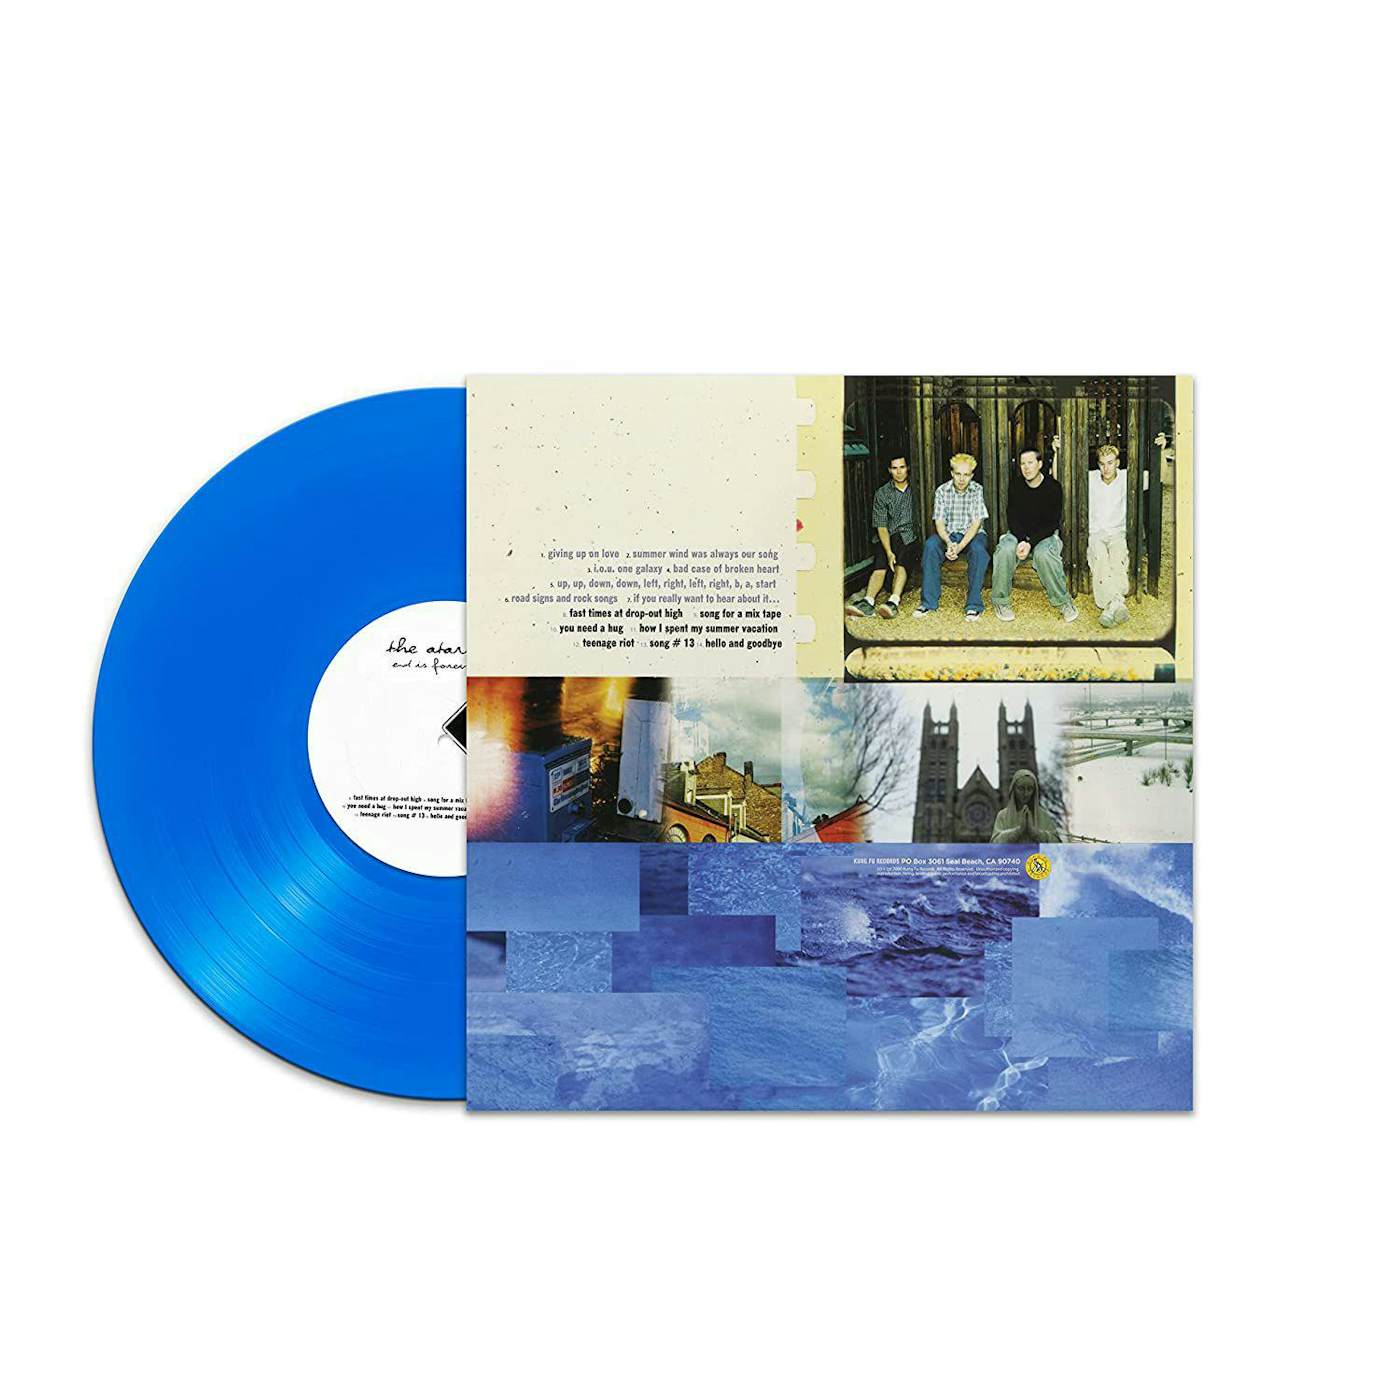 The Ataris END IS FOREVER (BLUE) Vinyl Record